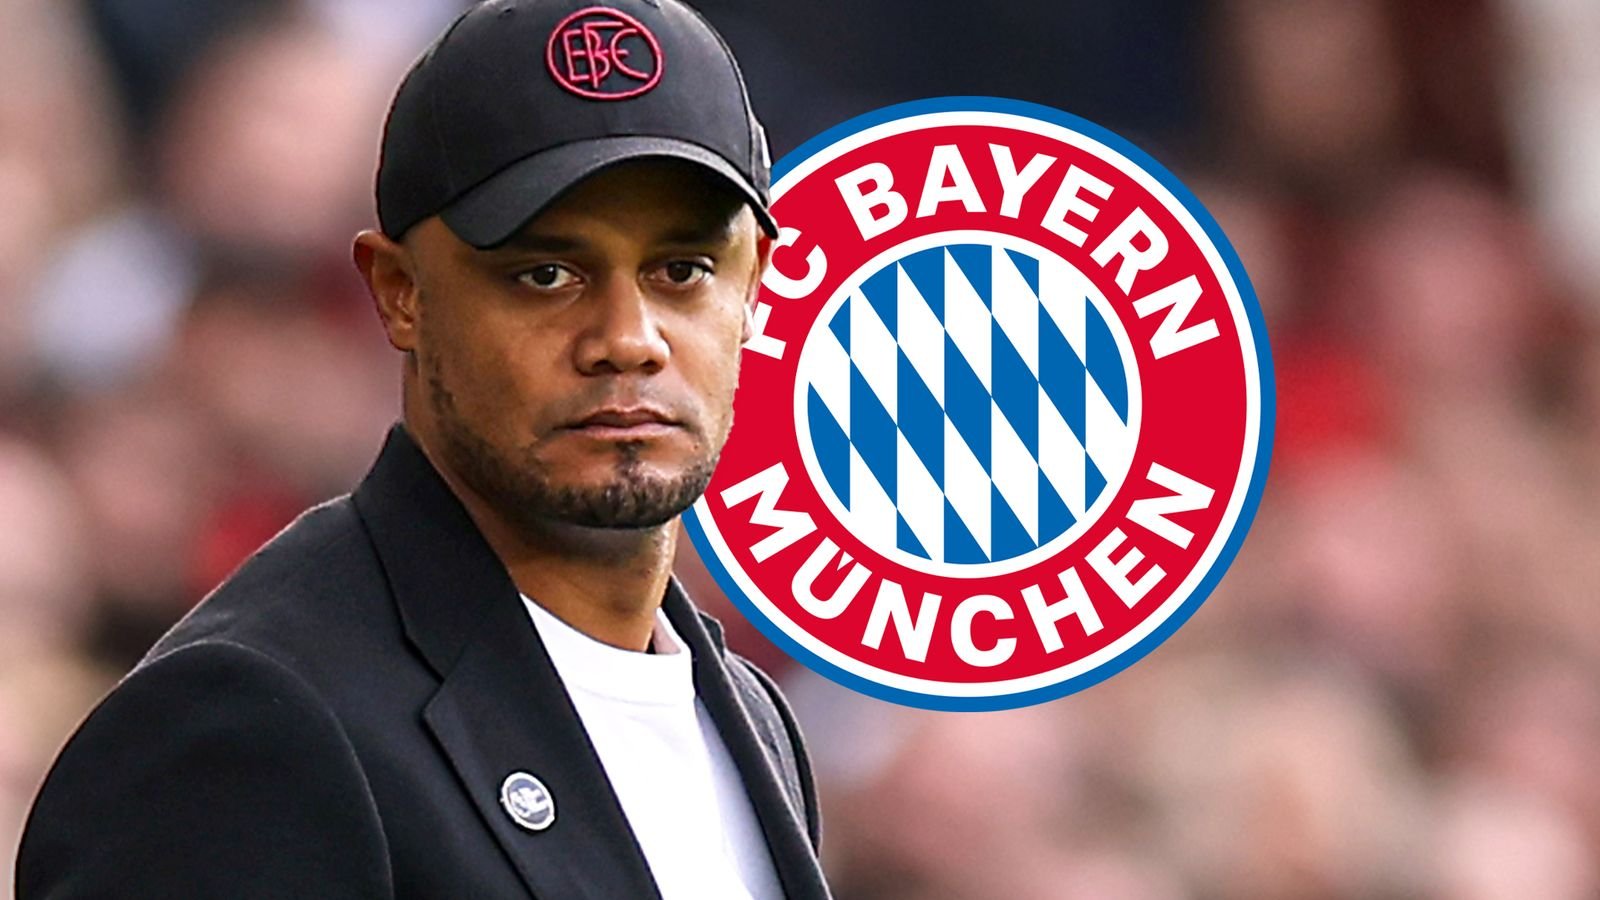 Vincent Kompany: Burnley boss has ‘verbal agreement’ to join Bayern Munich but deal not done – Sky in Germany | Football News